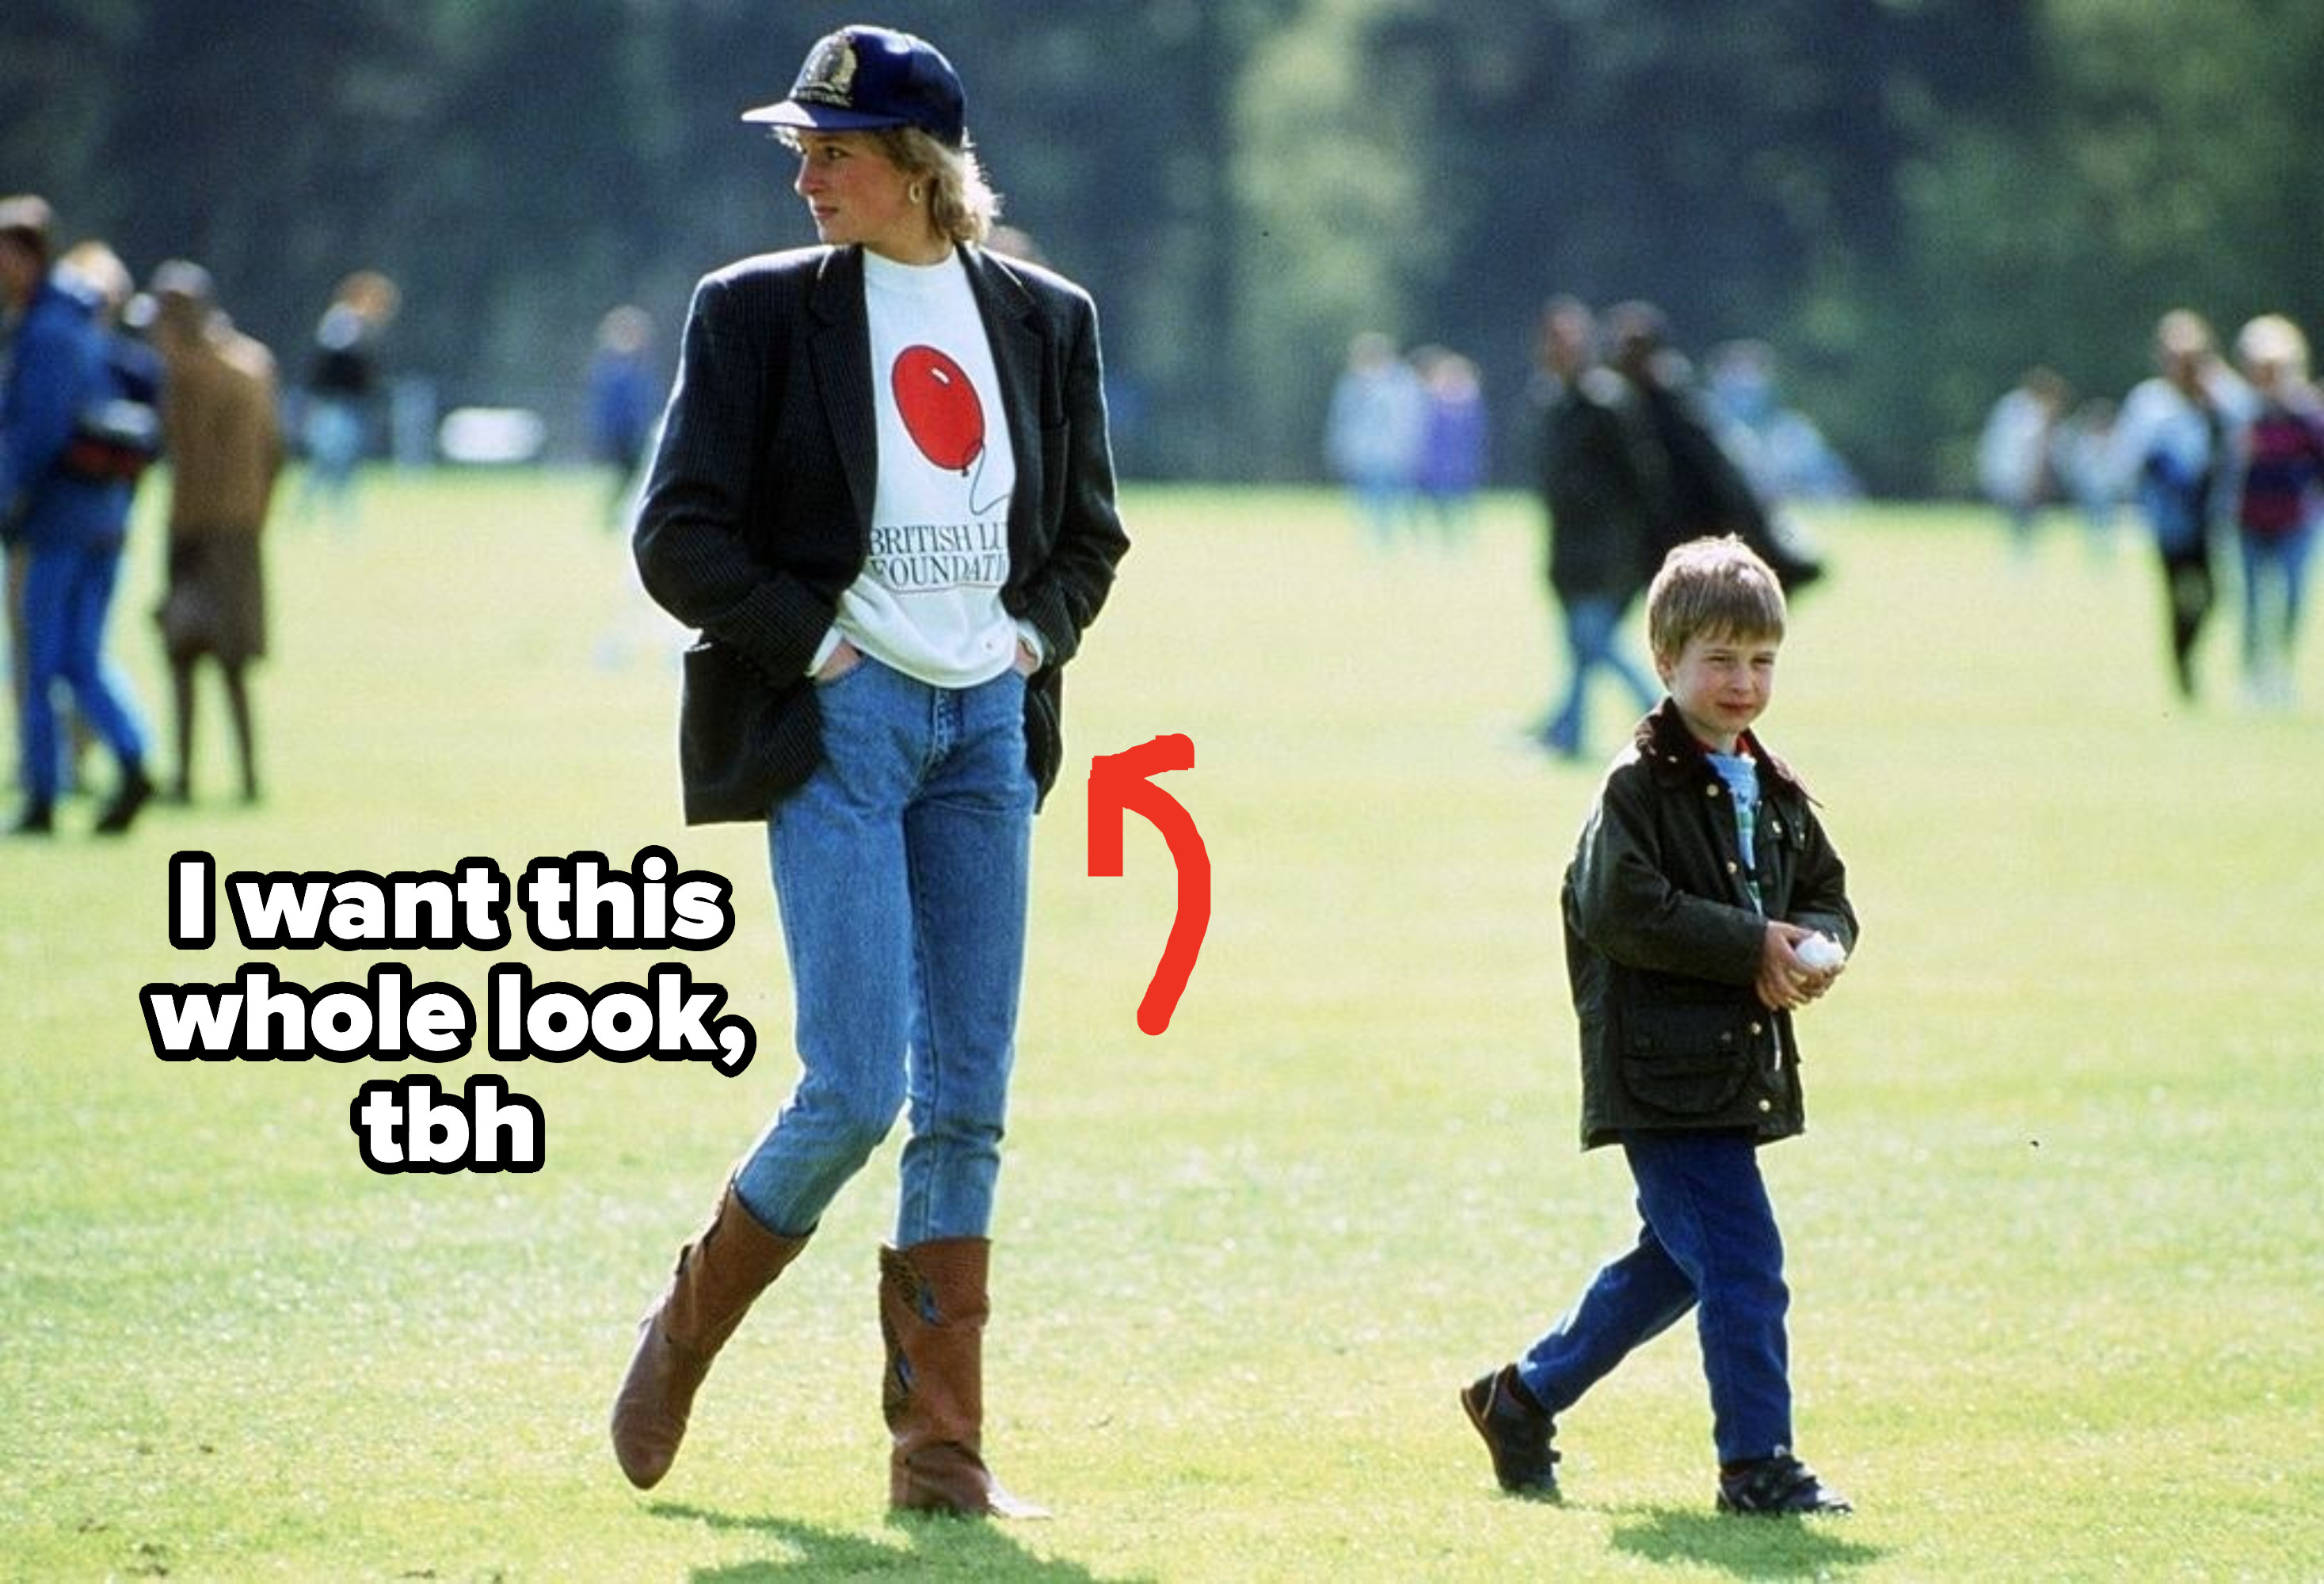 Princess Diana wearing jeans tucked into riding boots, and an oversized blazer